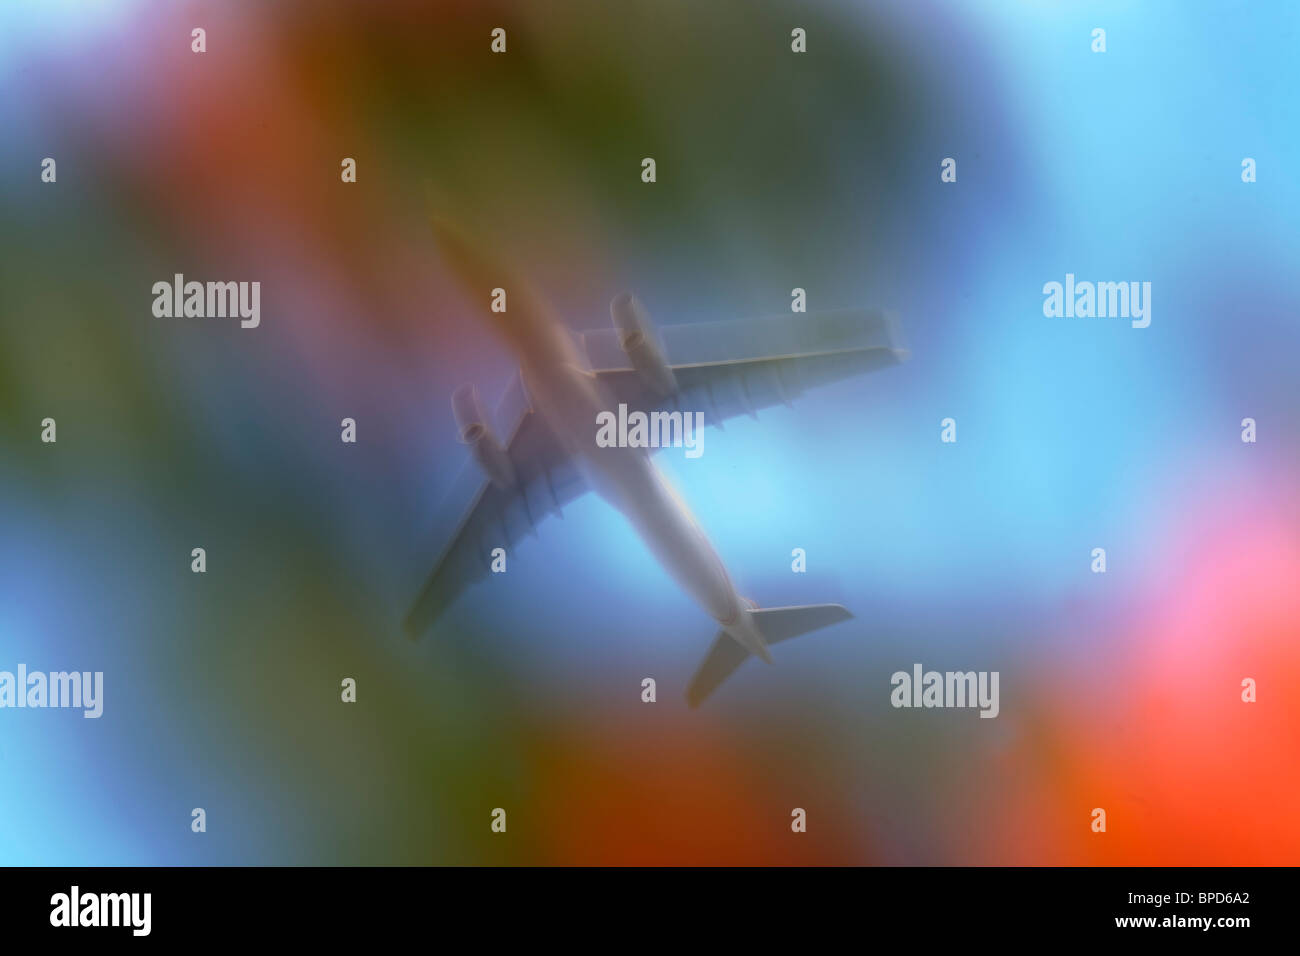 Seen through garden trees, a jet airliner passes overhead in bright skies, blurred purposely using a slow camera speed. Stock Photo